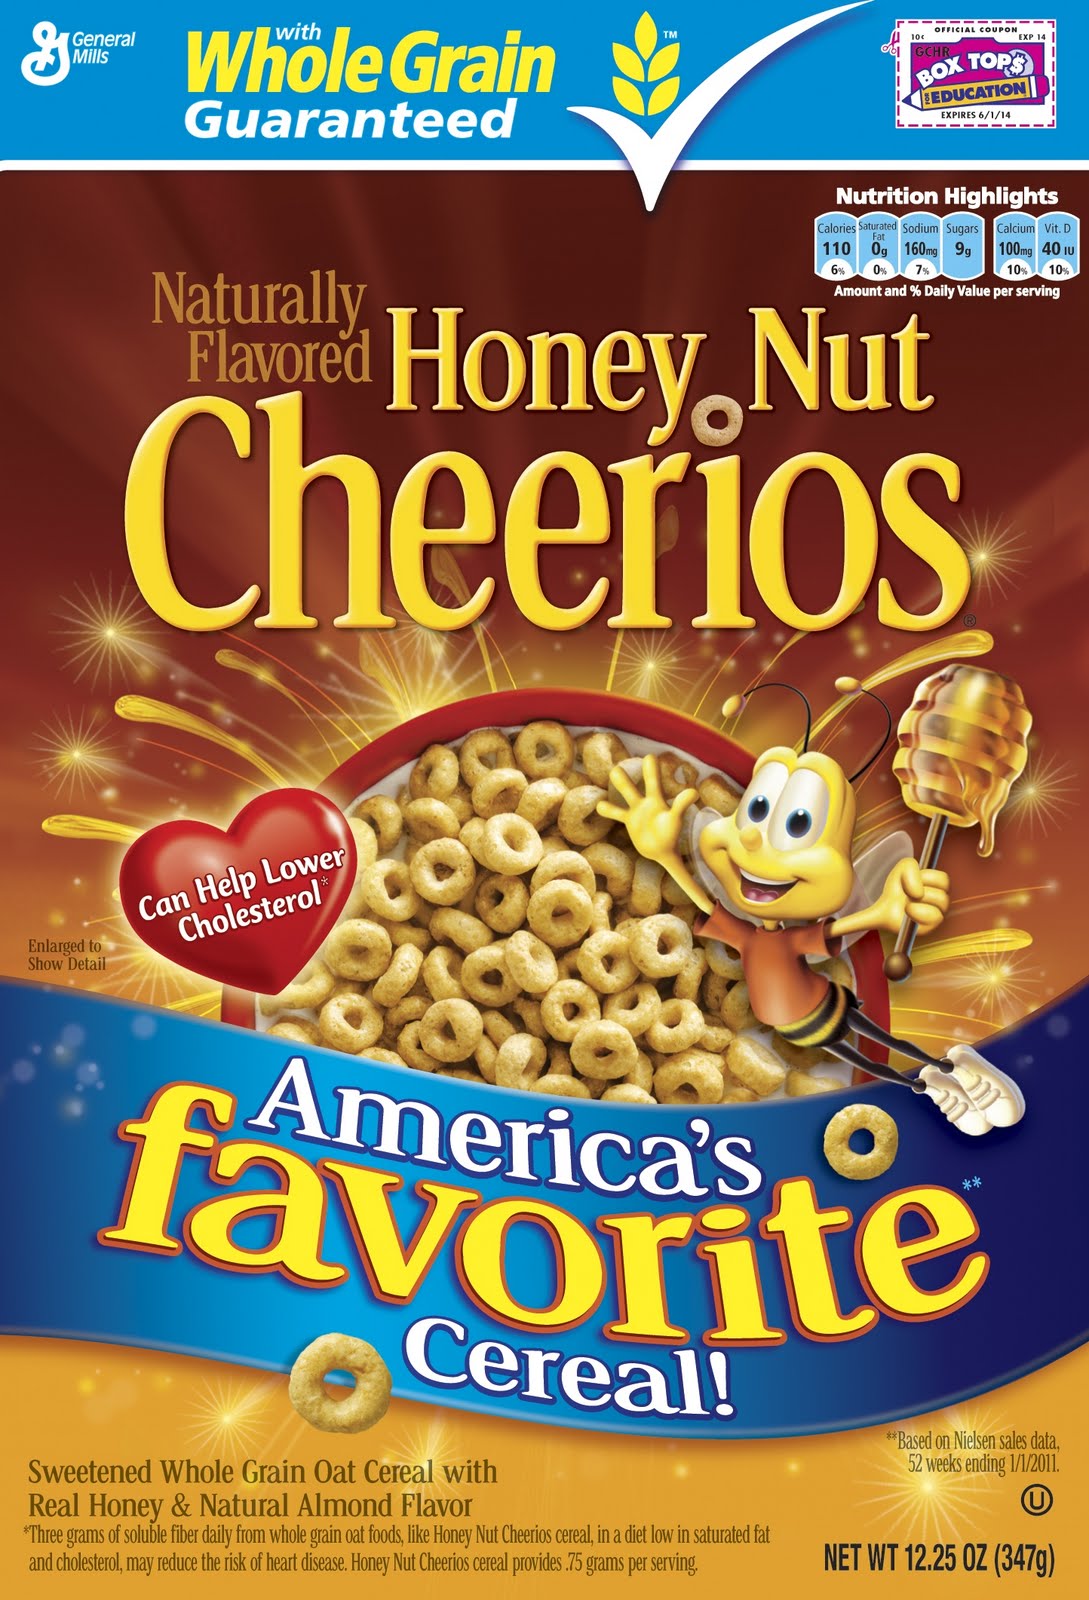 General Mills Being Shoved Down the Slippery Slope on GMO Free- Honey Nut Cheerios Targeted